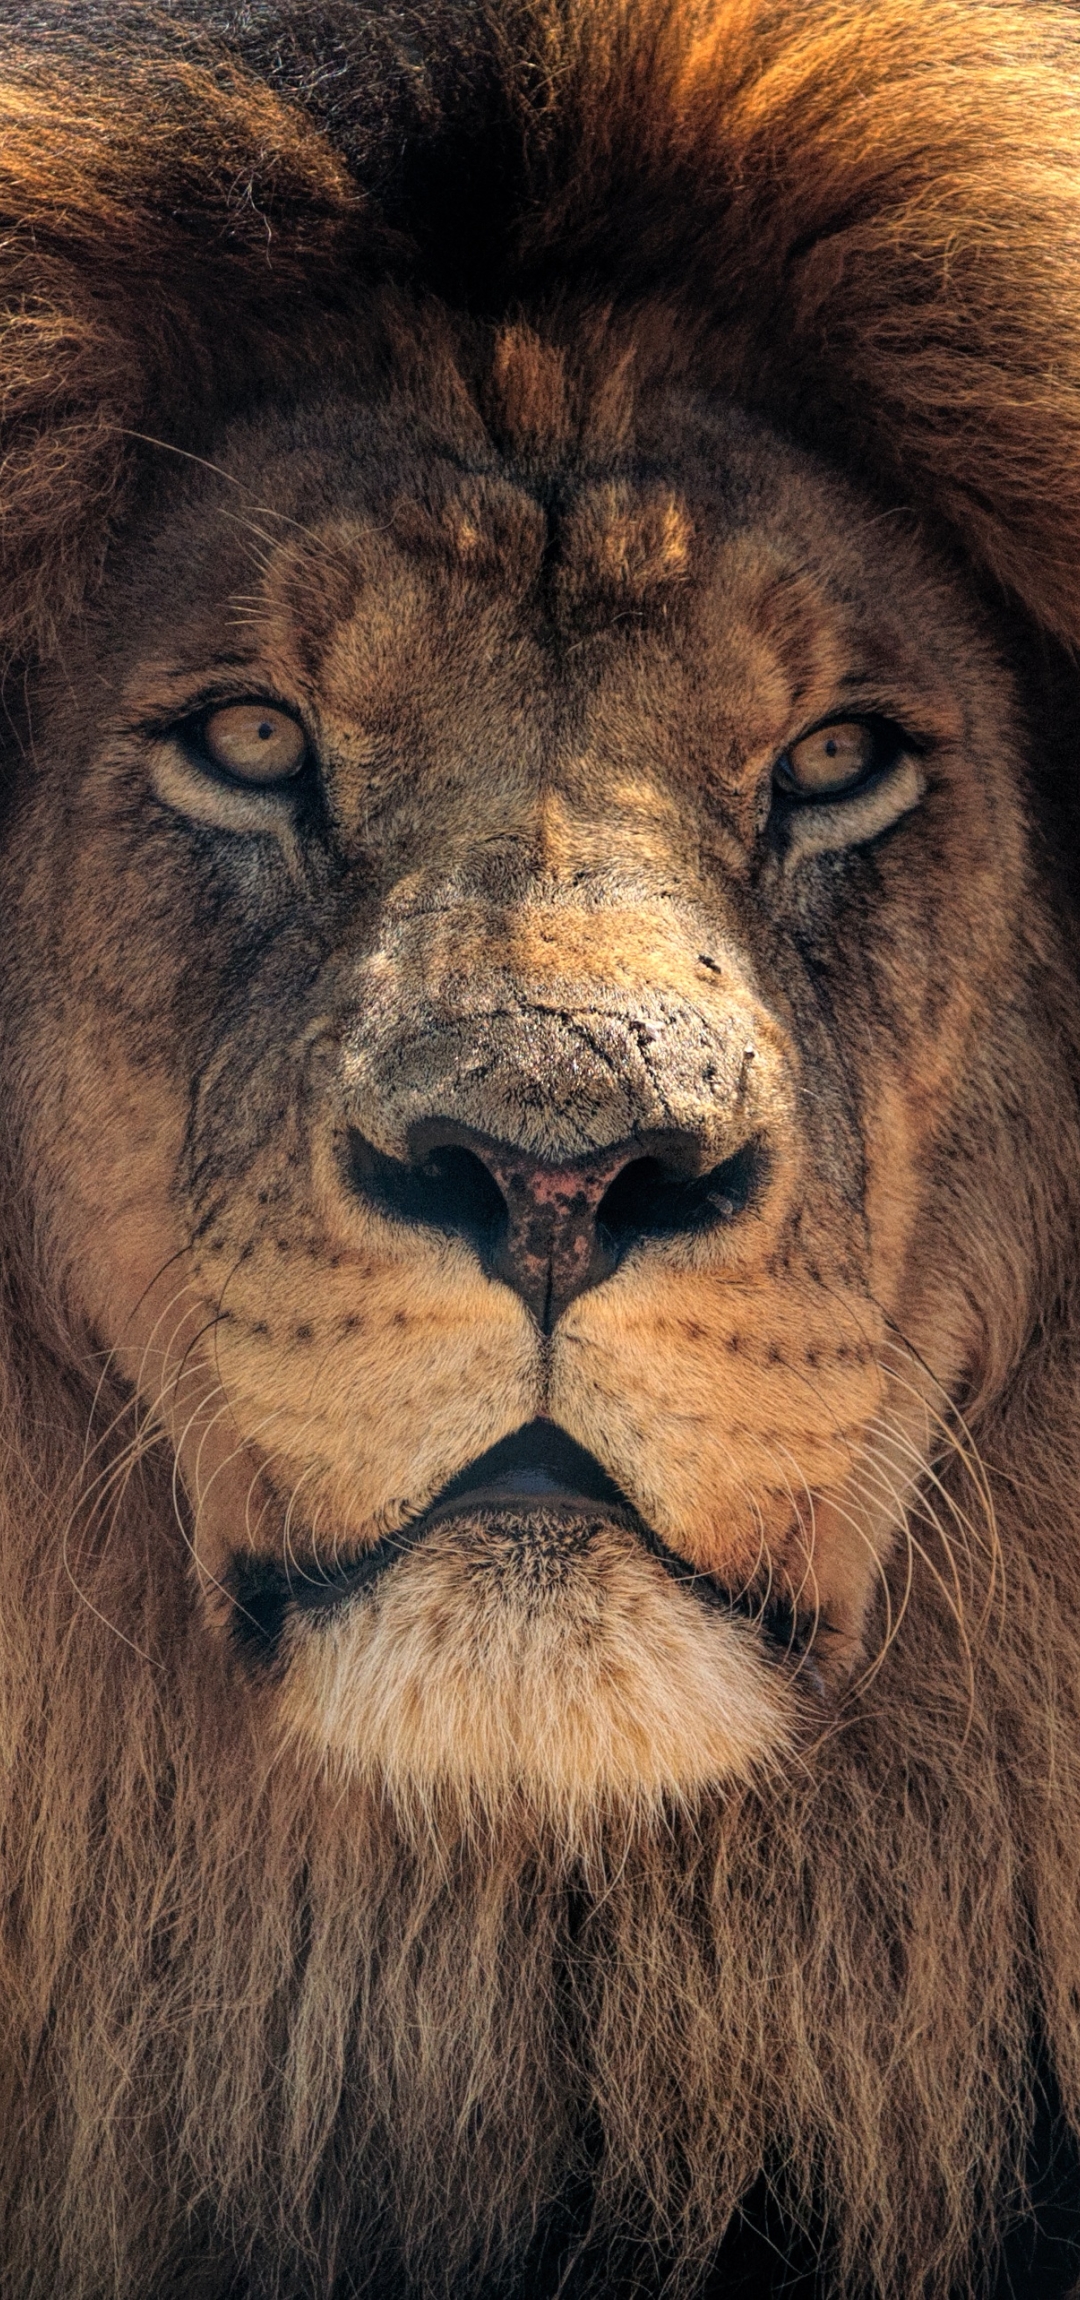 The Lion IPhone Wallpaper HD  IPhone Wallpapers  iPhone Wallpapers